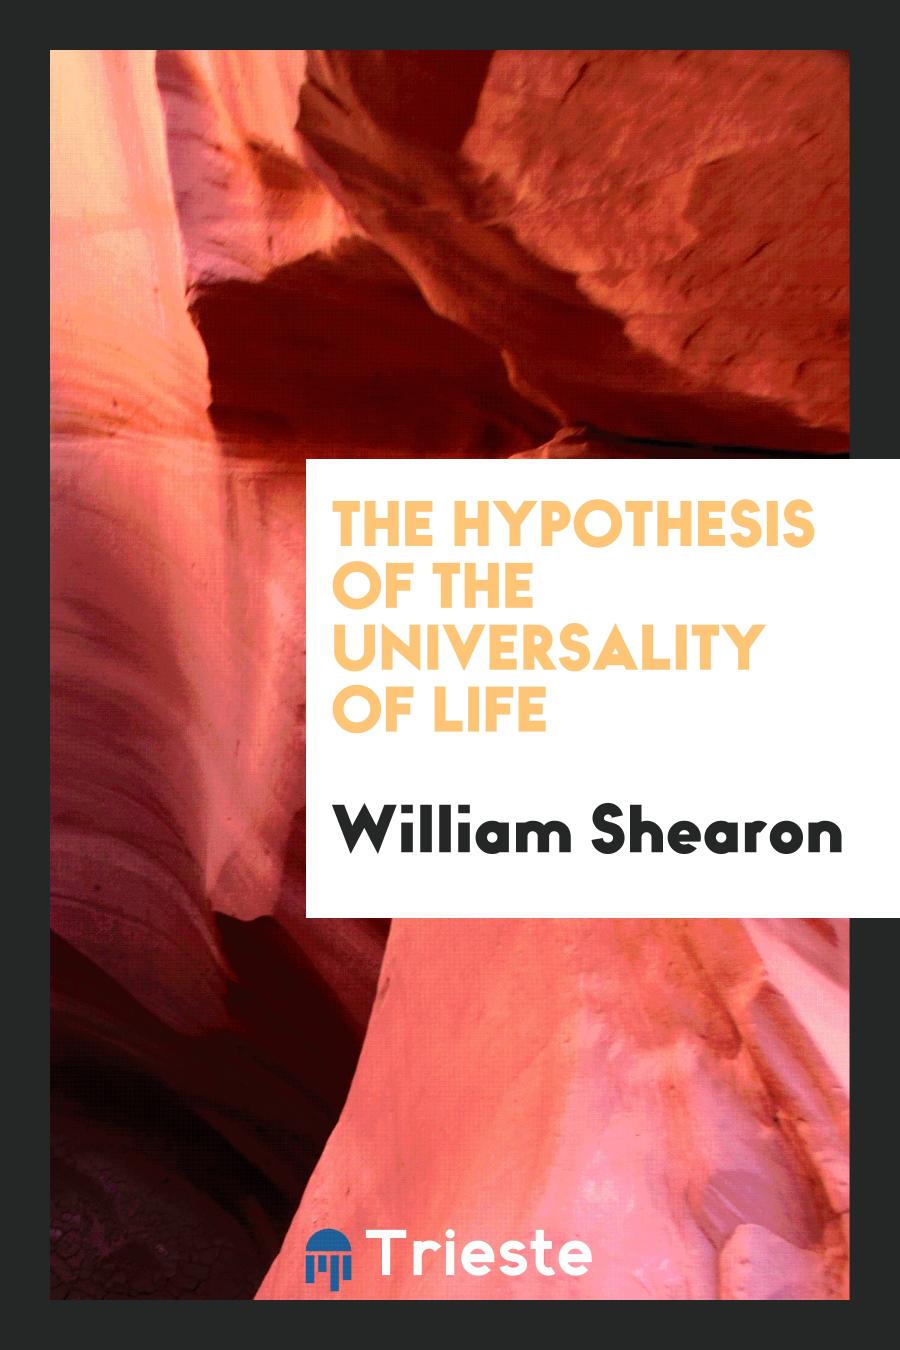 The Hypothesis of the Universality of Life